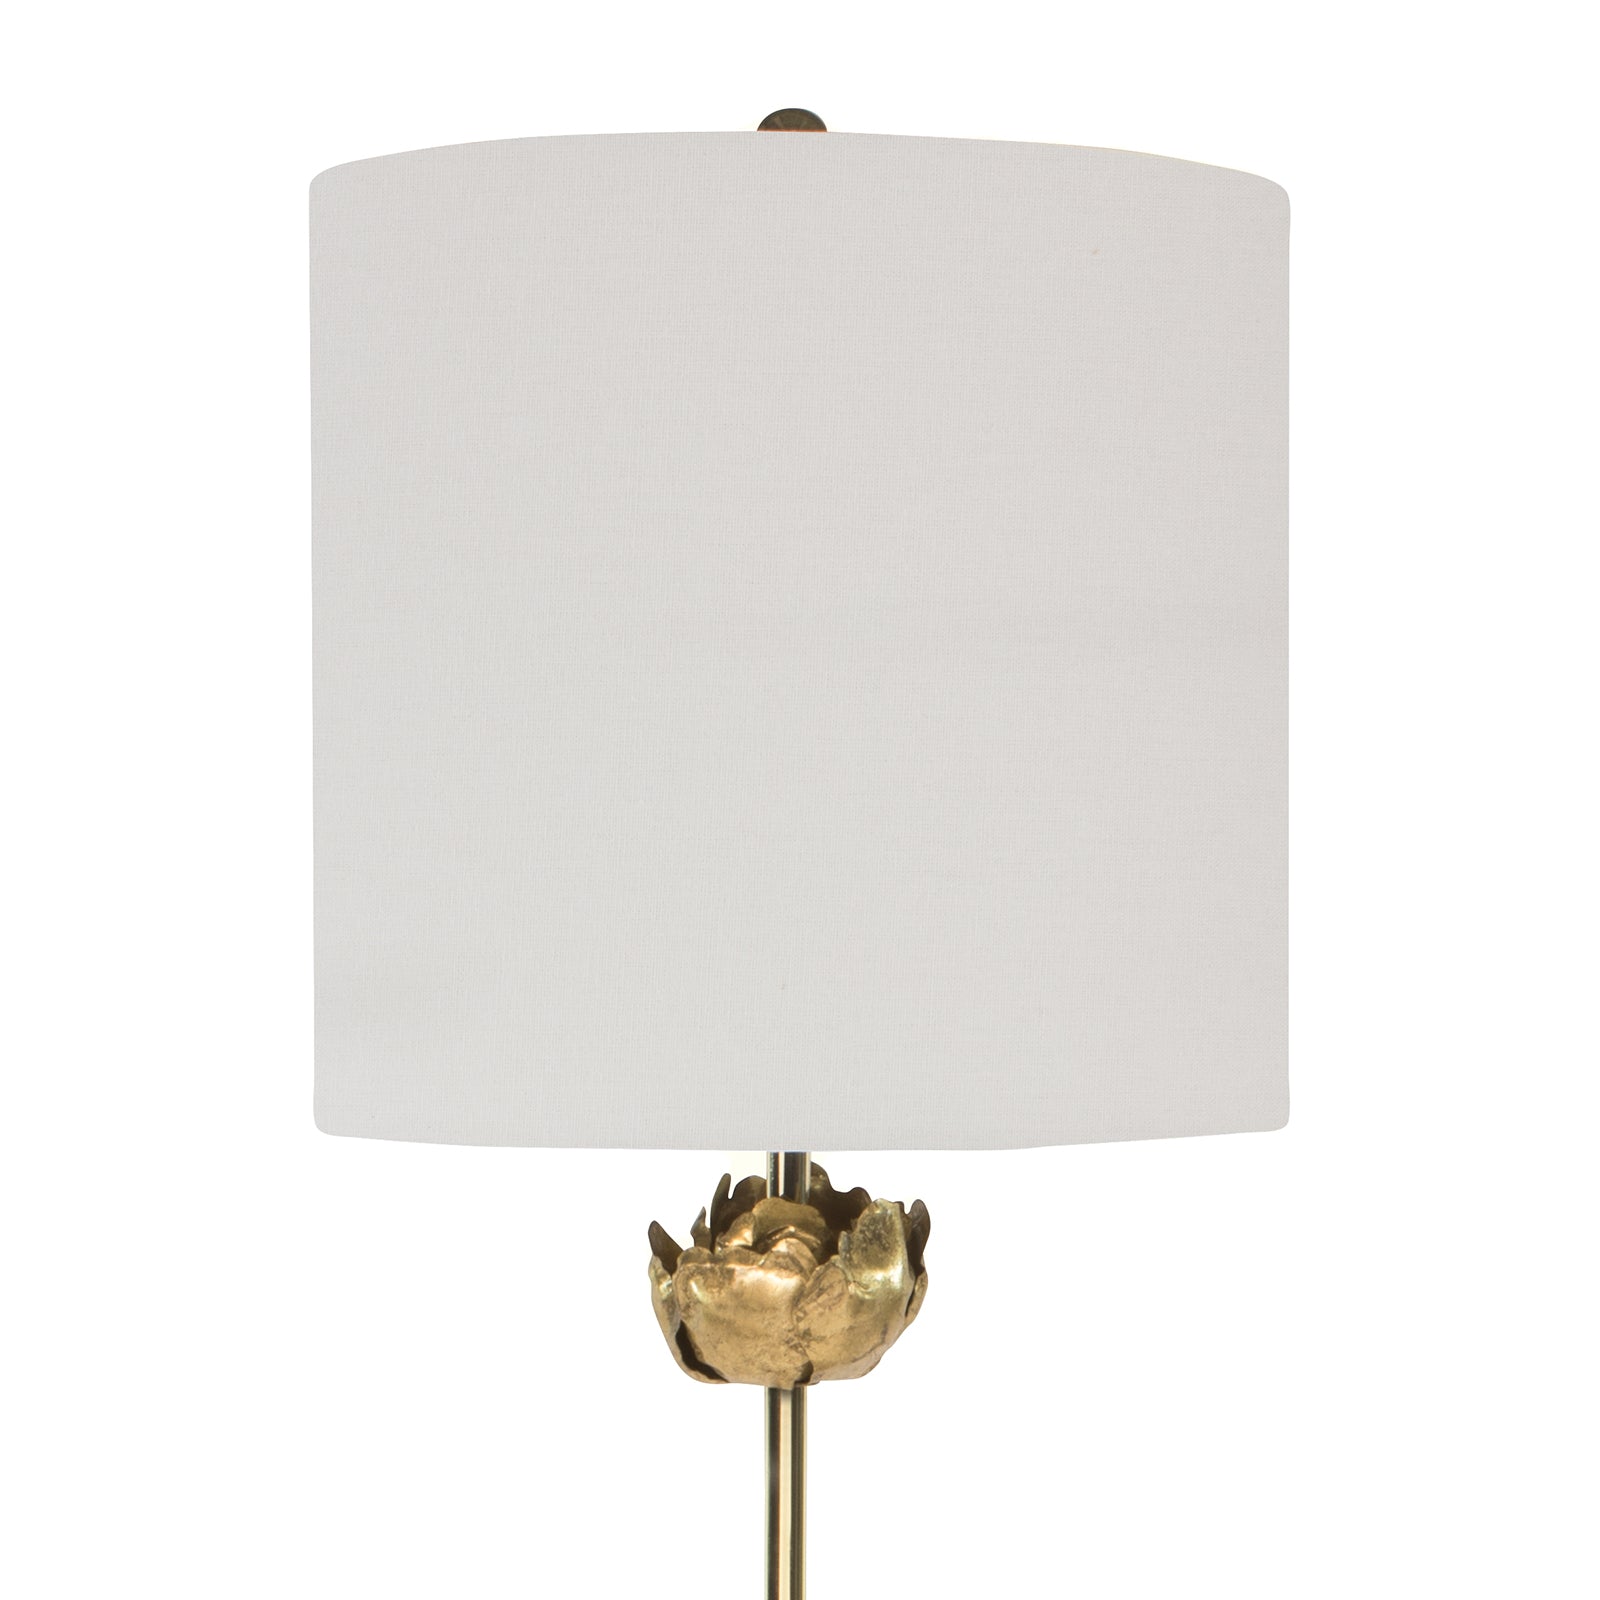 Adeline Buffet Table Lamp by Regina Andrew